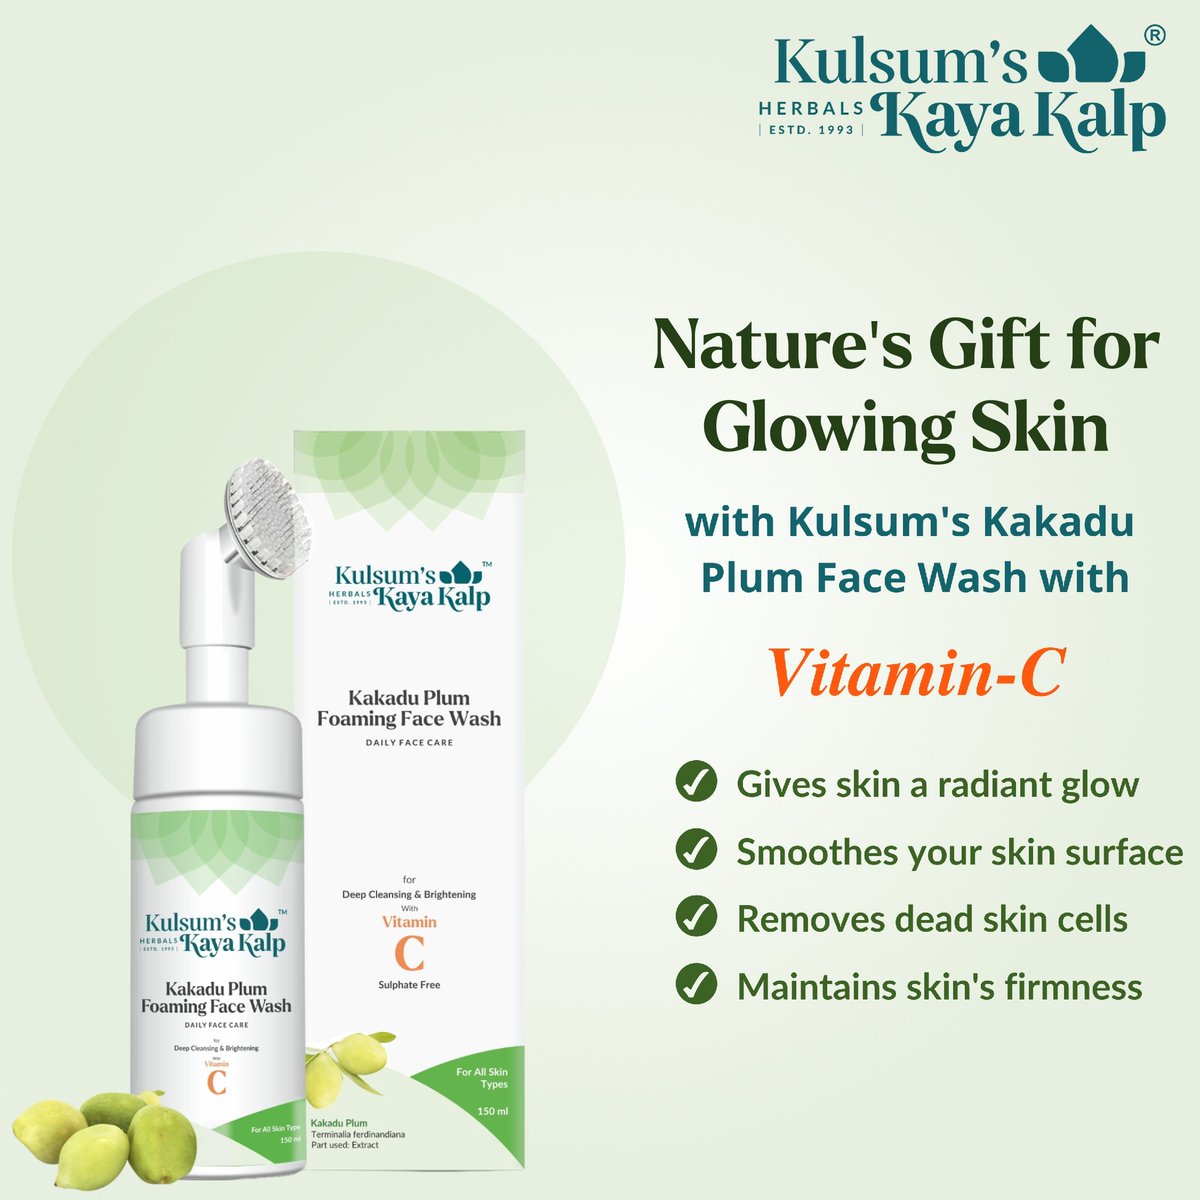 Elevate your skincare ritual with the brilliance of Kulsum's Kakadu Plum Foaming Face Wash. Infused with the natural radiance of Kakadu Plum, this foaming cleanser is a symphony of nourishment and gentle cleansing! 🍃

#facewash #herbalfacewash #vitaminc #skincare #faceglow